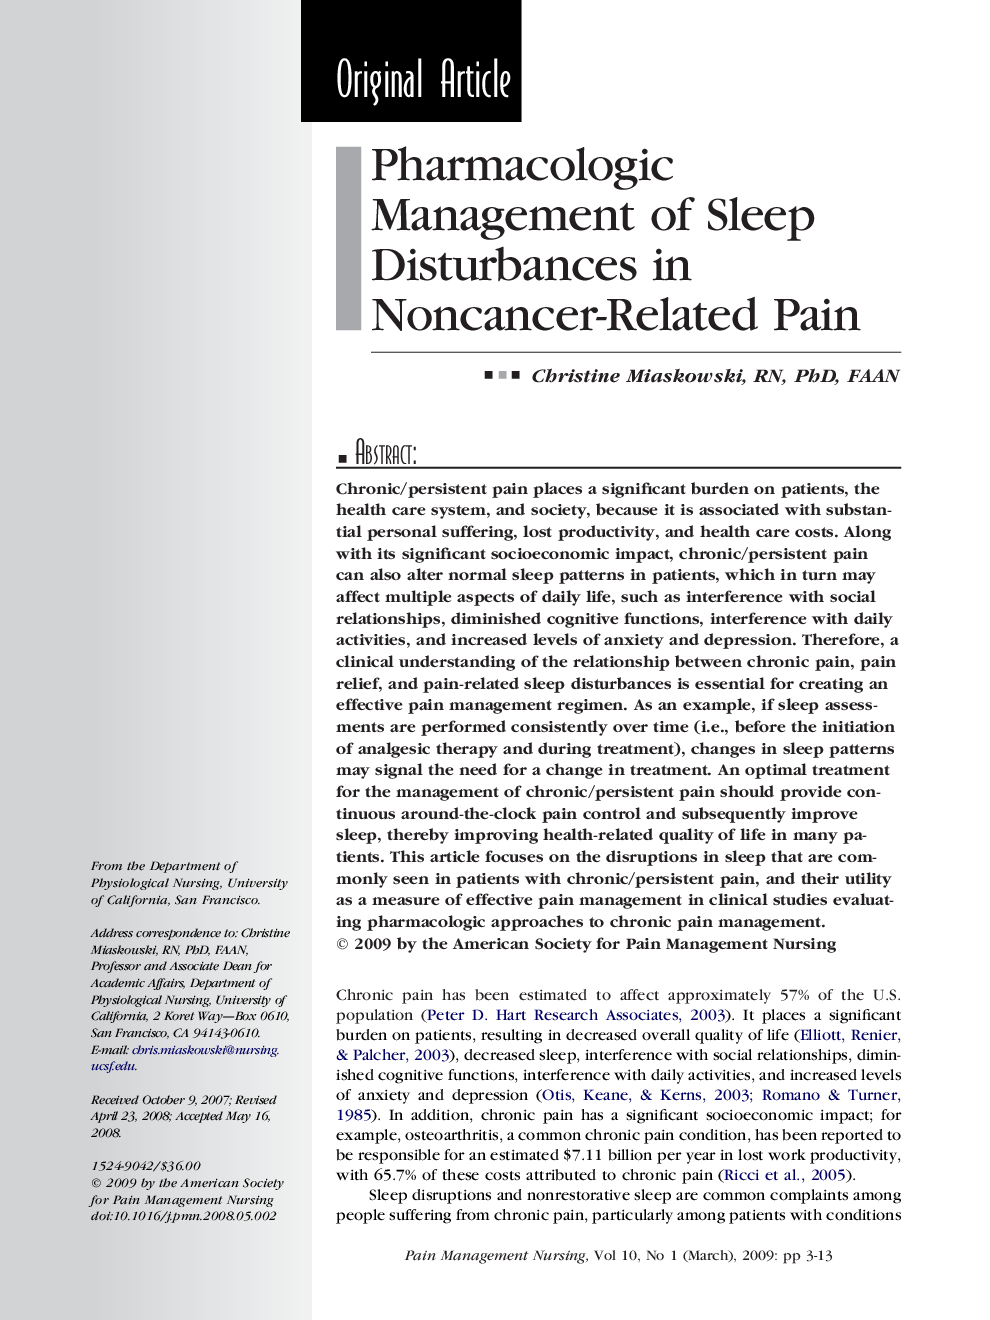 Pharmacologic Management of Sleep Disturbances in Noncancer-Related Pain